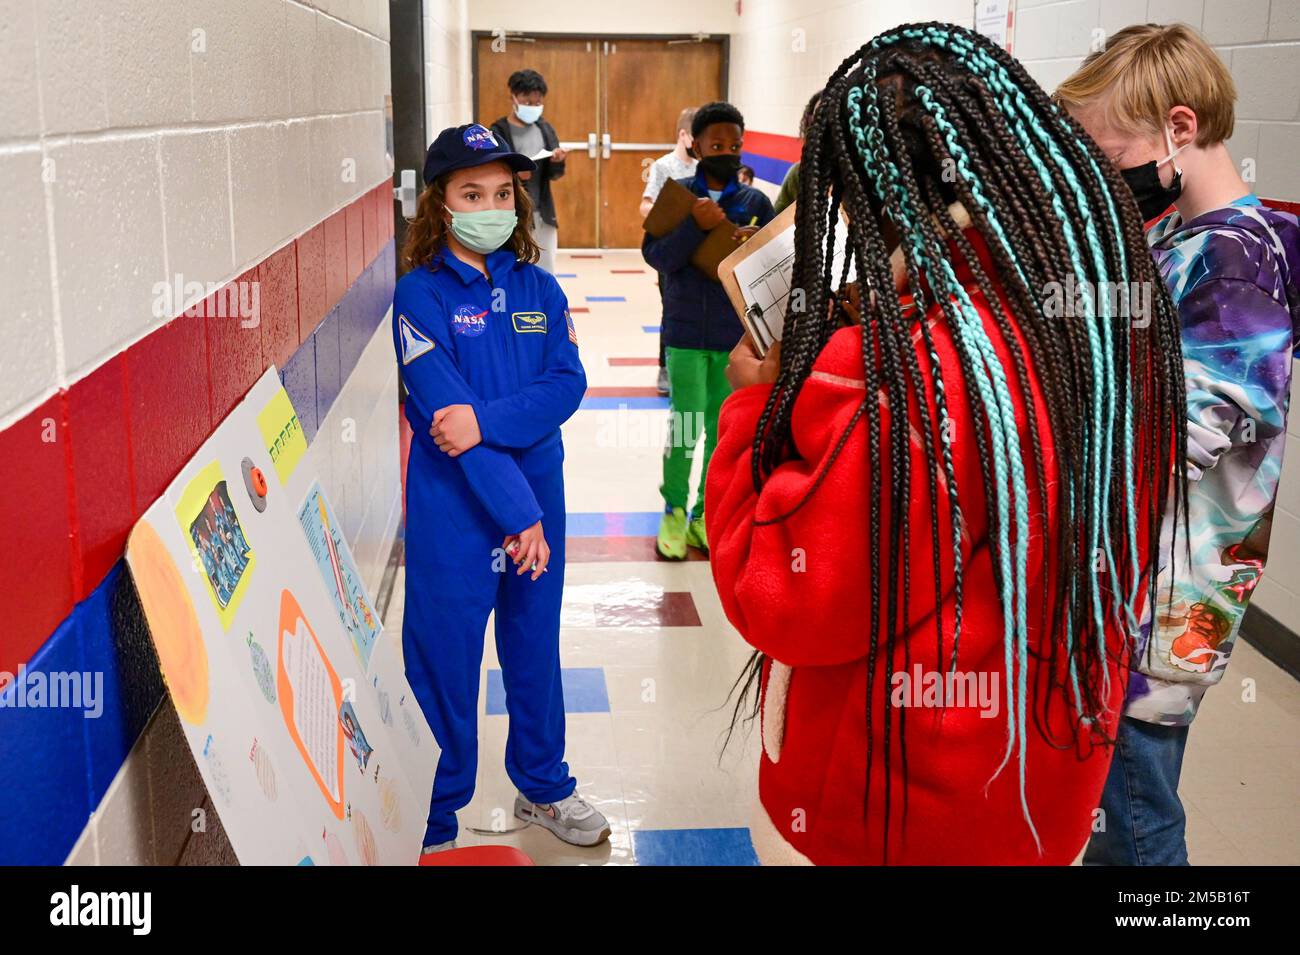 Dressed in a NASA flight suit, Elisabeth Enoch portrays teacher and astronaut Christa McAuliffe Feb, 17, 2022, during the C.C. Pinckney Elementary School’s Living History Museum. Each student picked a historical figure and researched their lives and deeds to speak about them to their peers during the event. Stock Photo